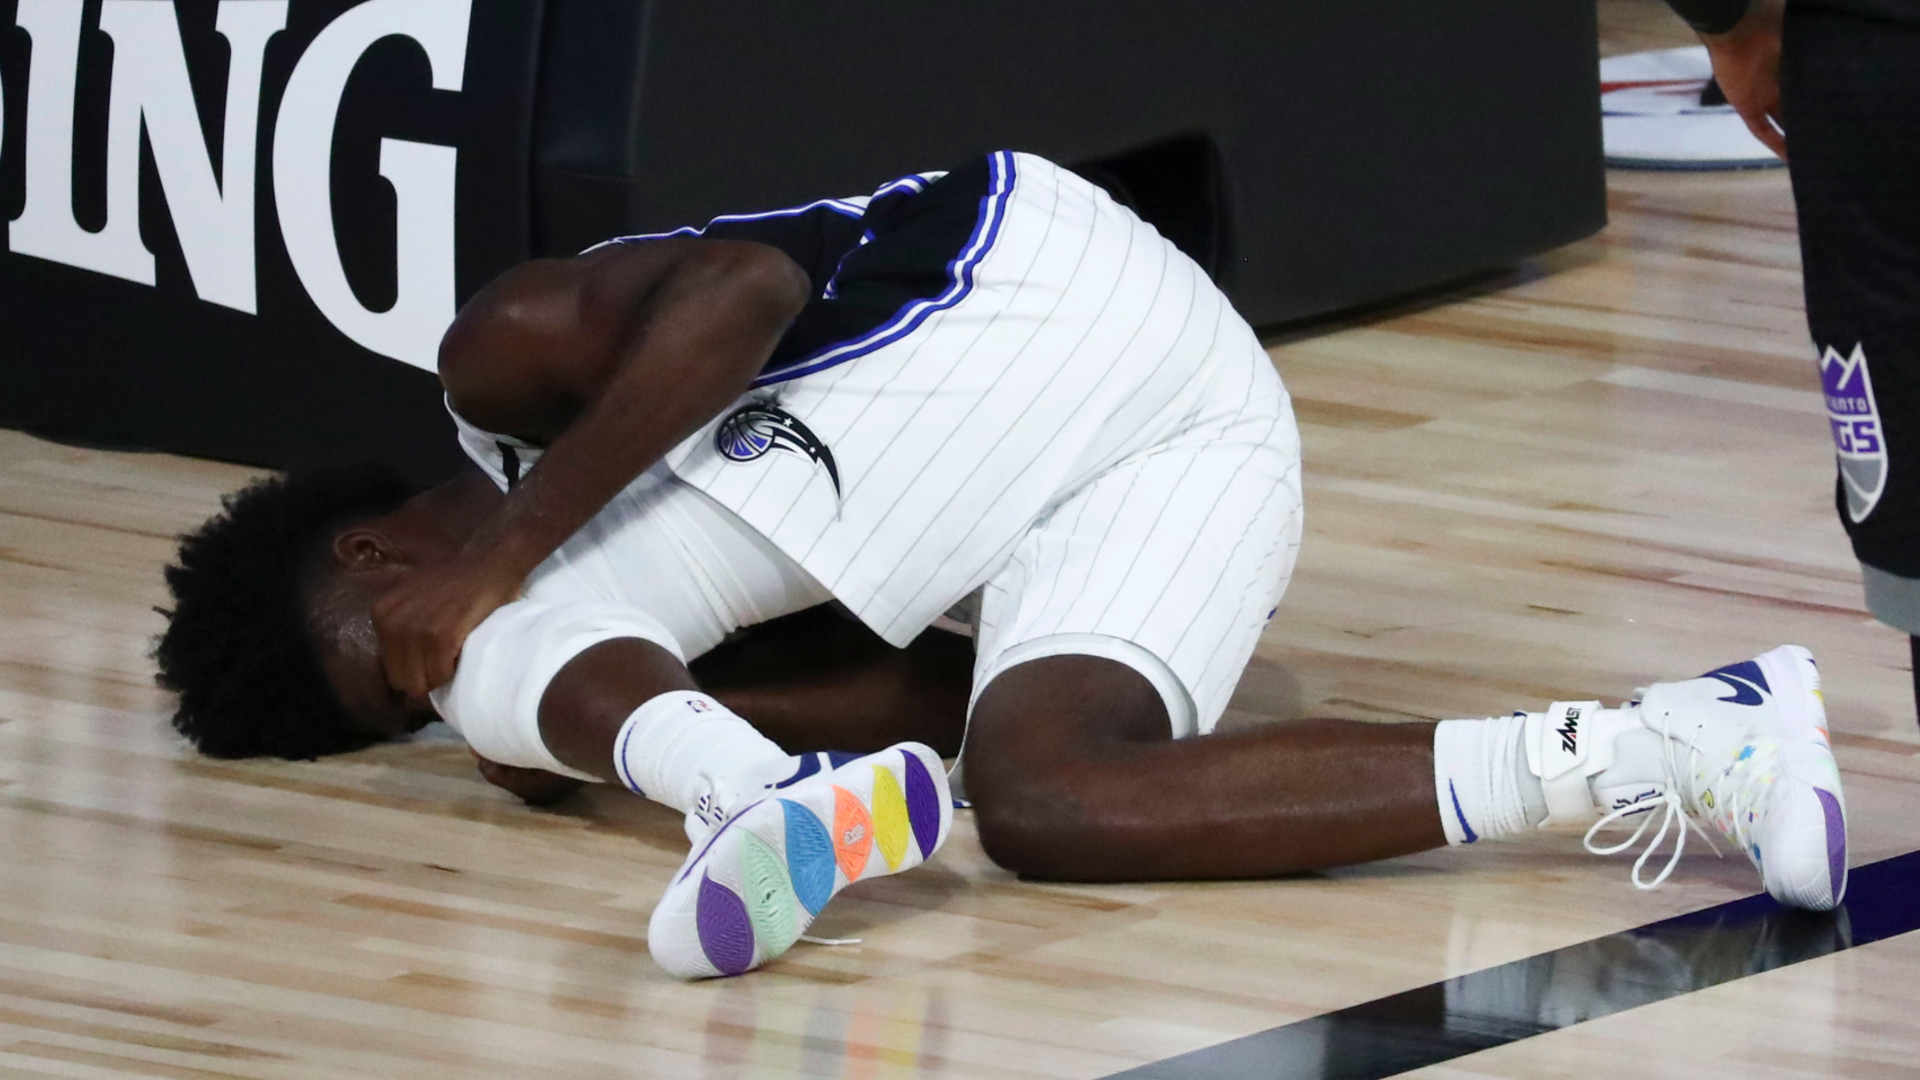 Orlando Magic confirmed Jonathan Isaac has a torn ACL and consider the forward to be out "indefinitely".